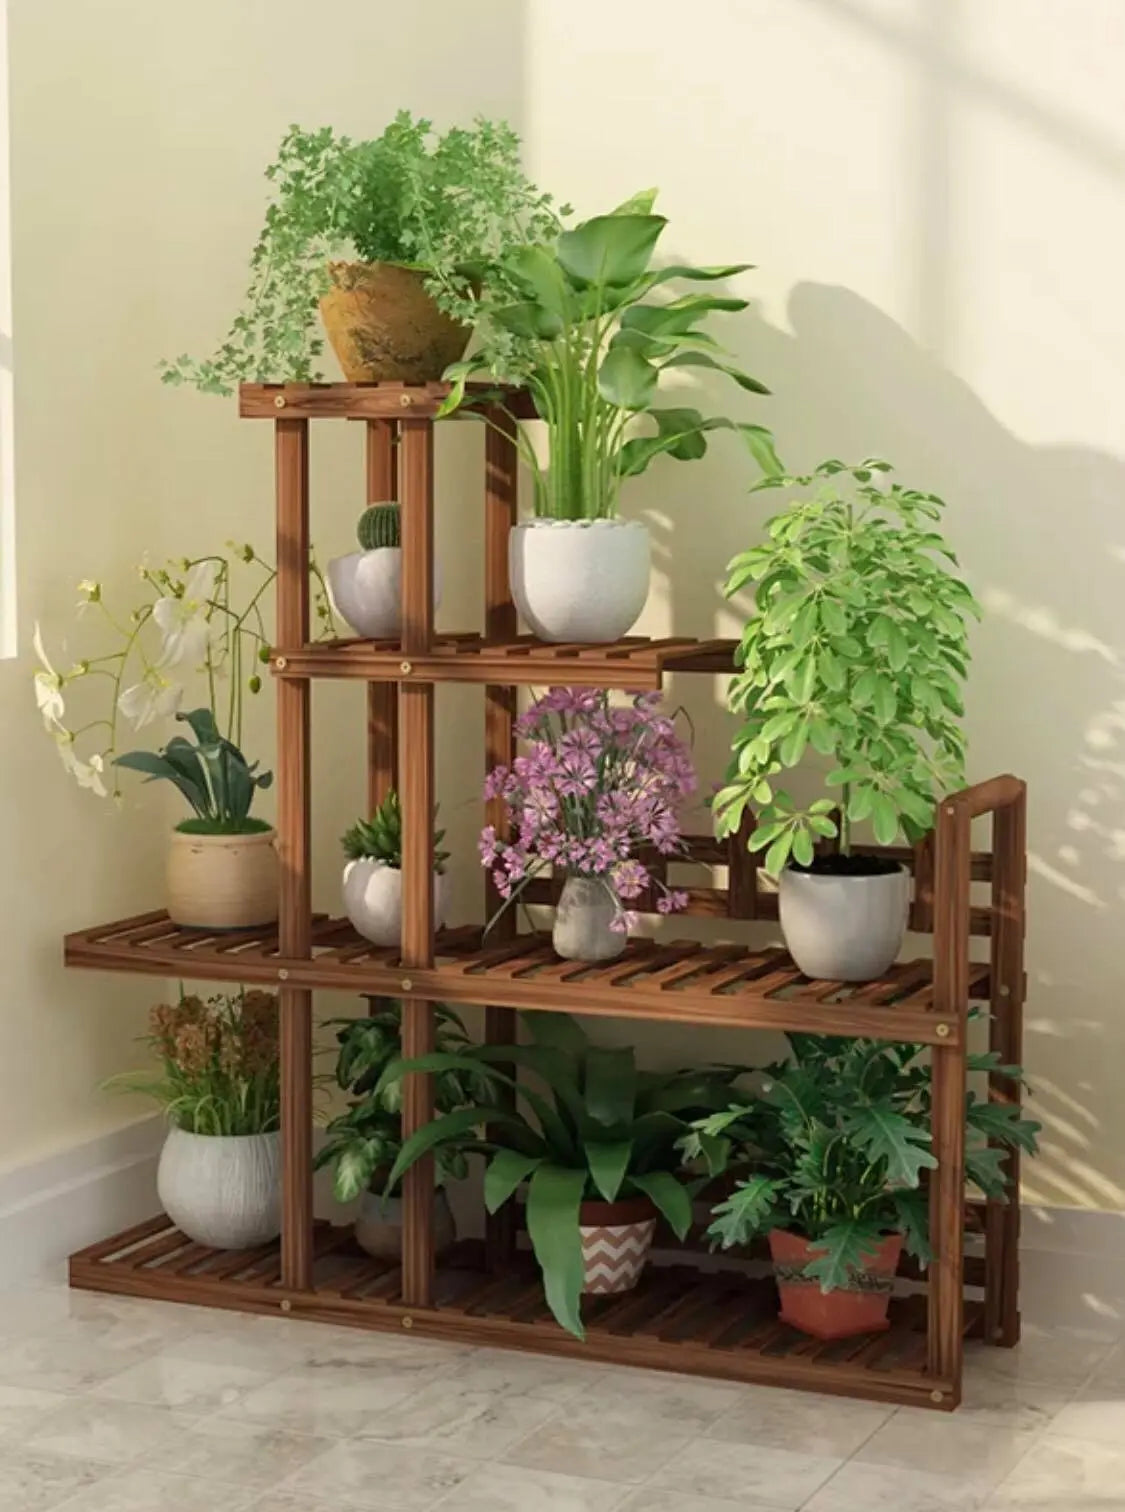 Premium Wooden Plant Stand Indoor Outdoor Garden Planter With Or Without Wheels everythingbamboo